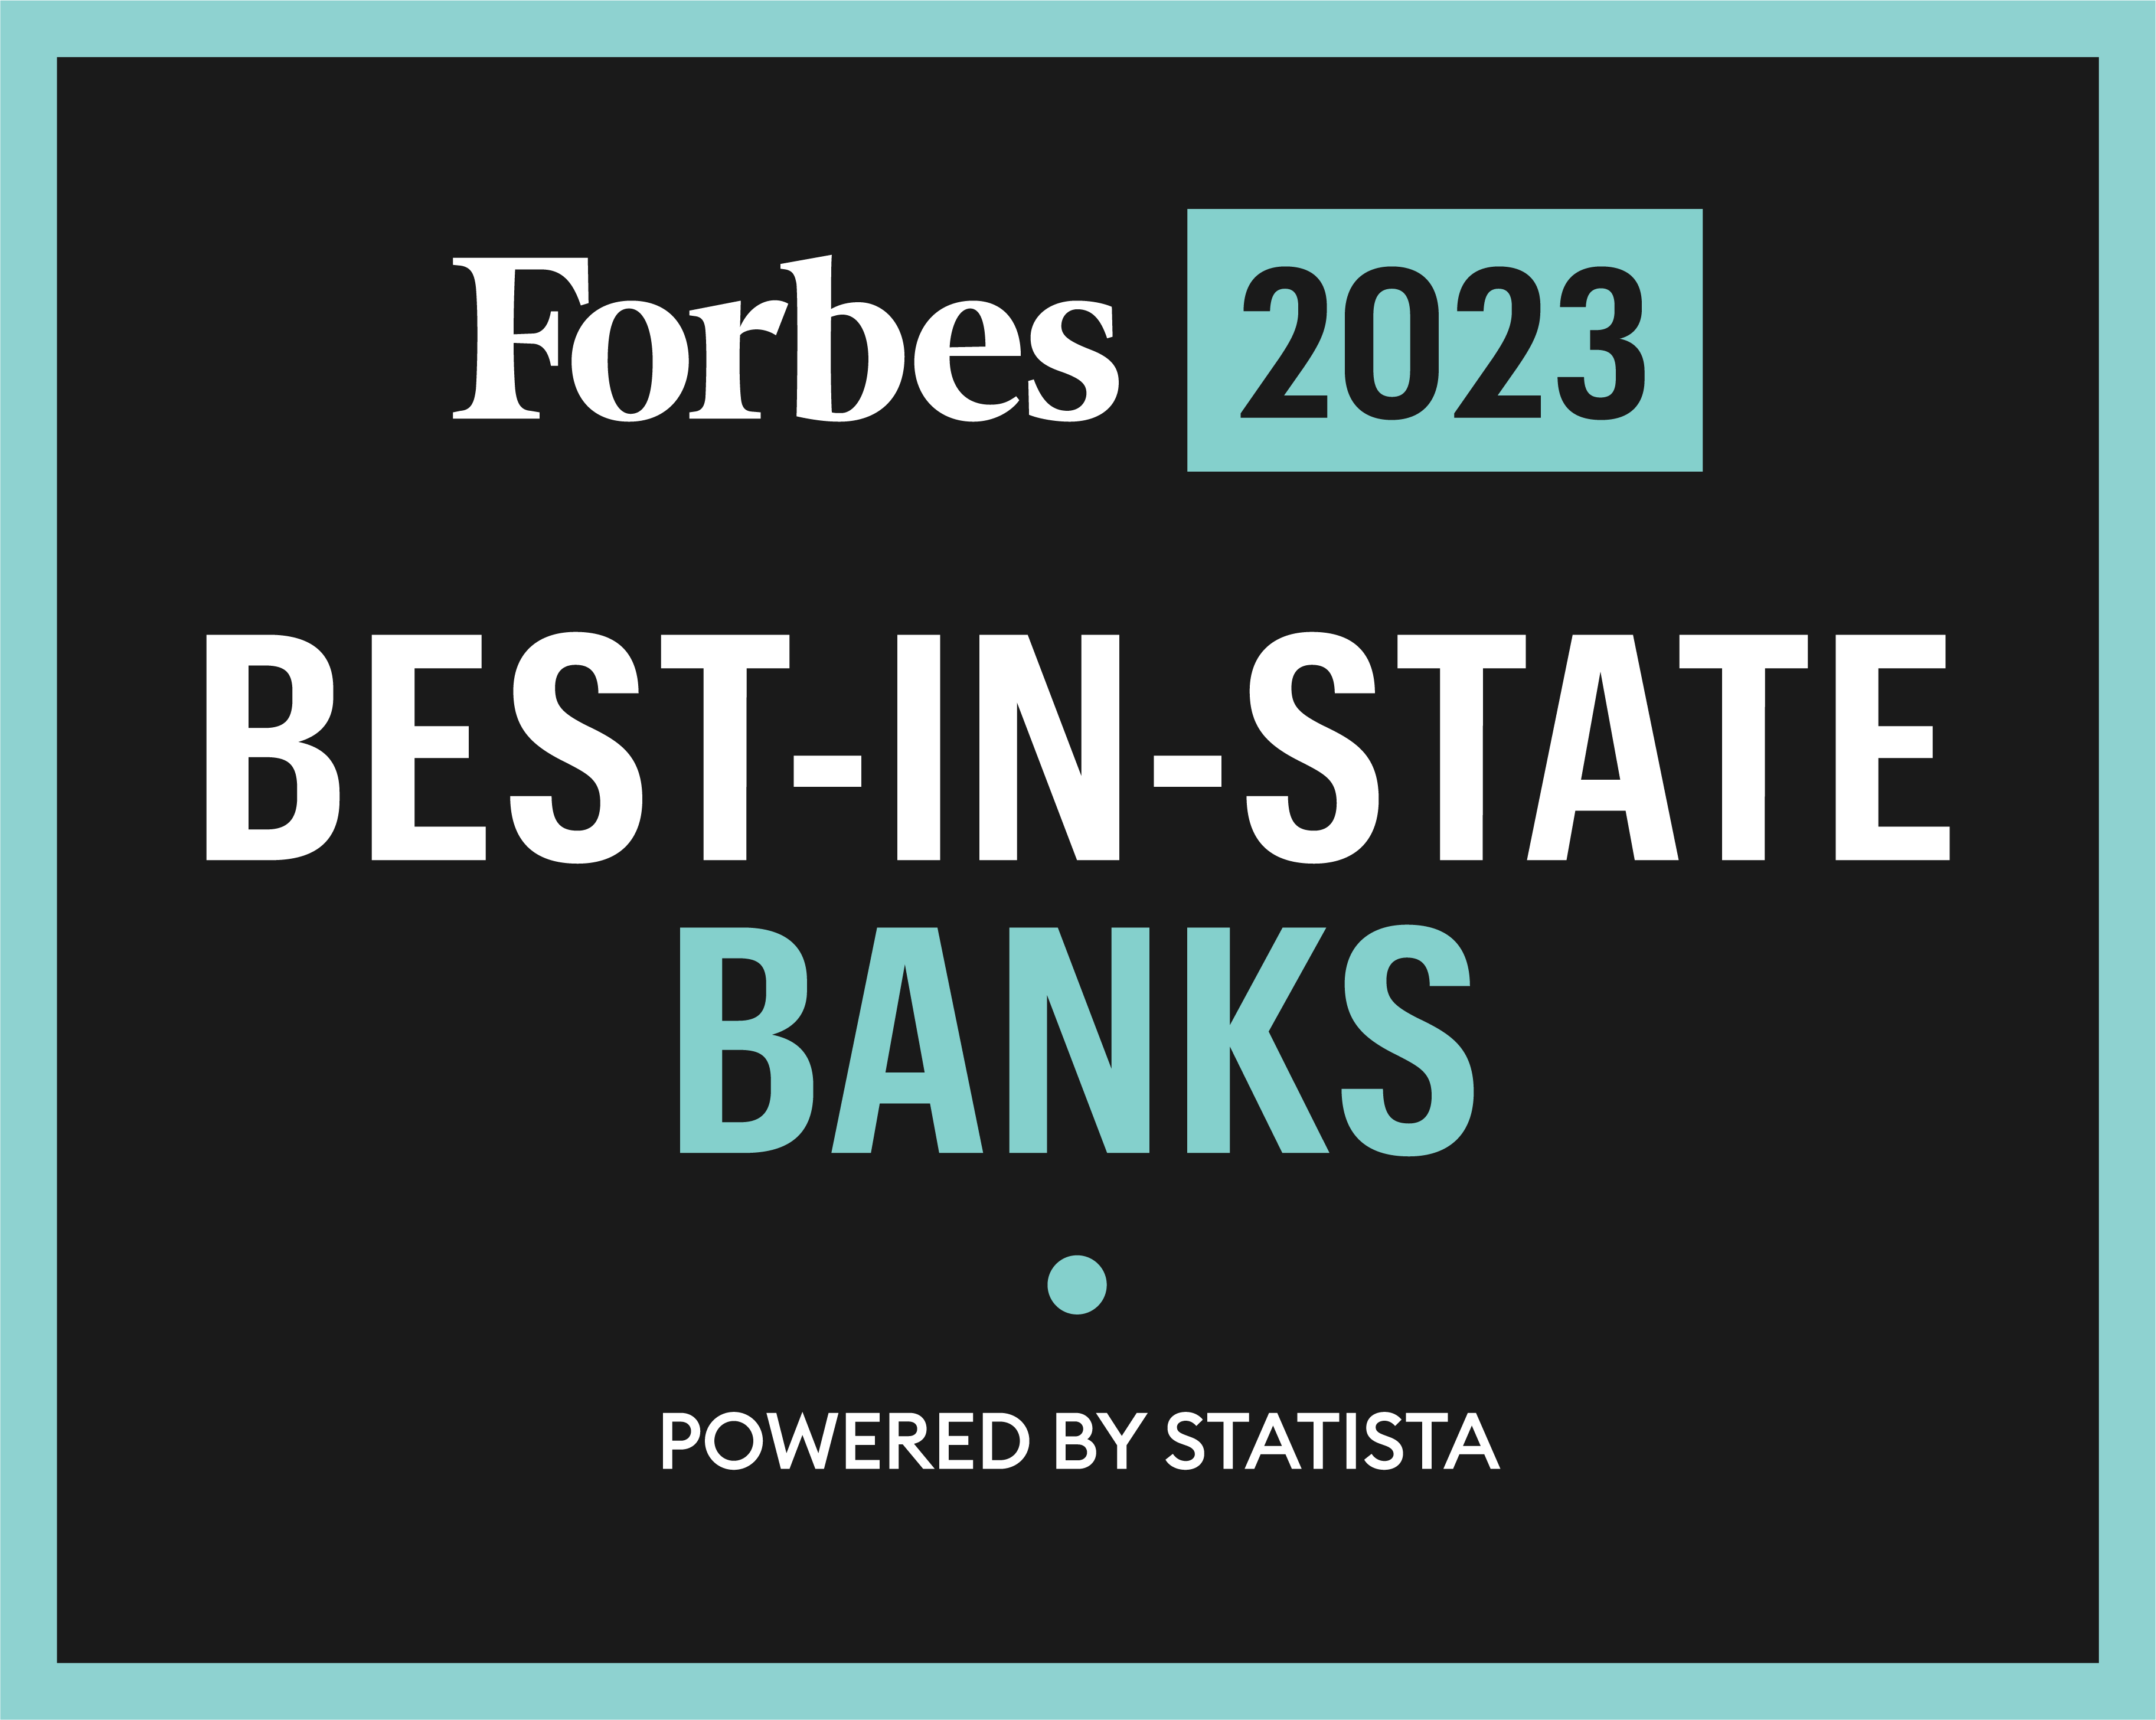 Centier Bank: Forbes 2023 Best Bank In State Award